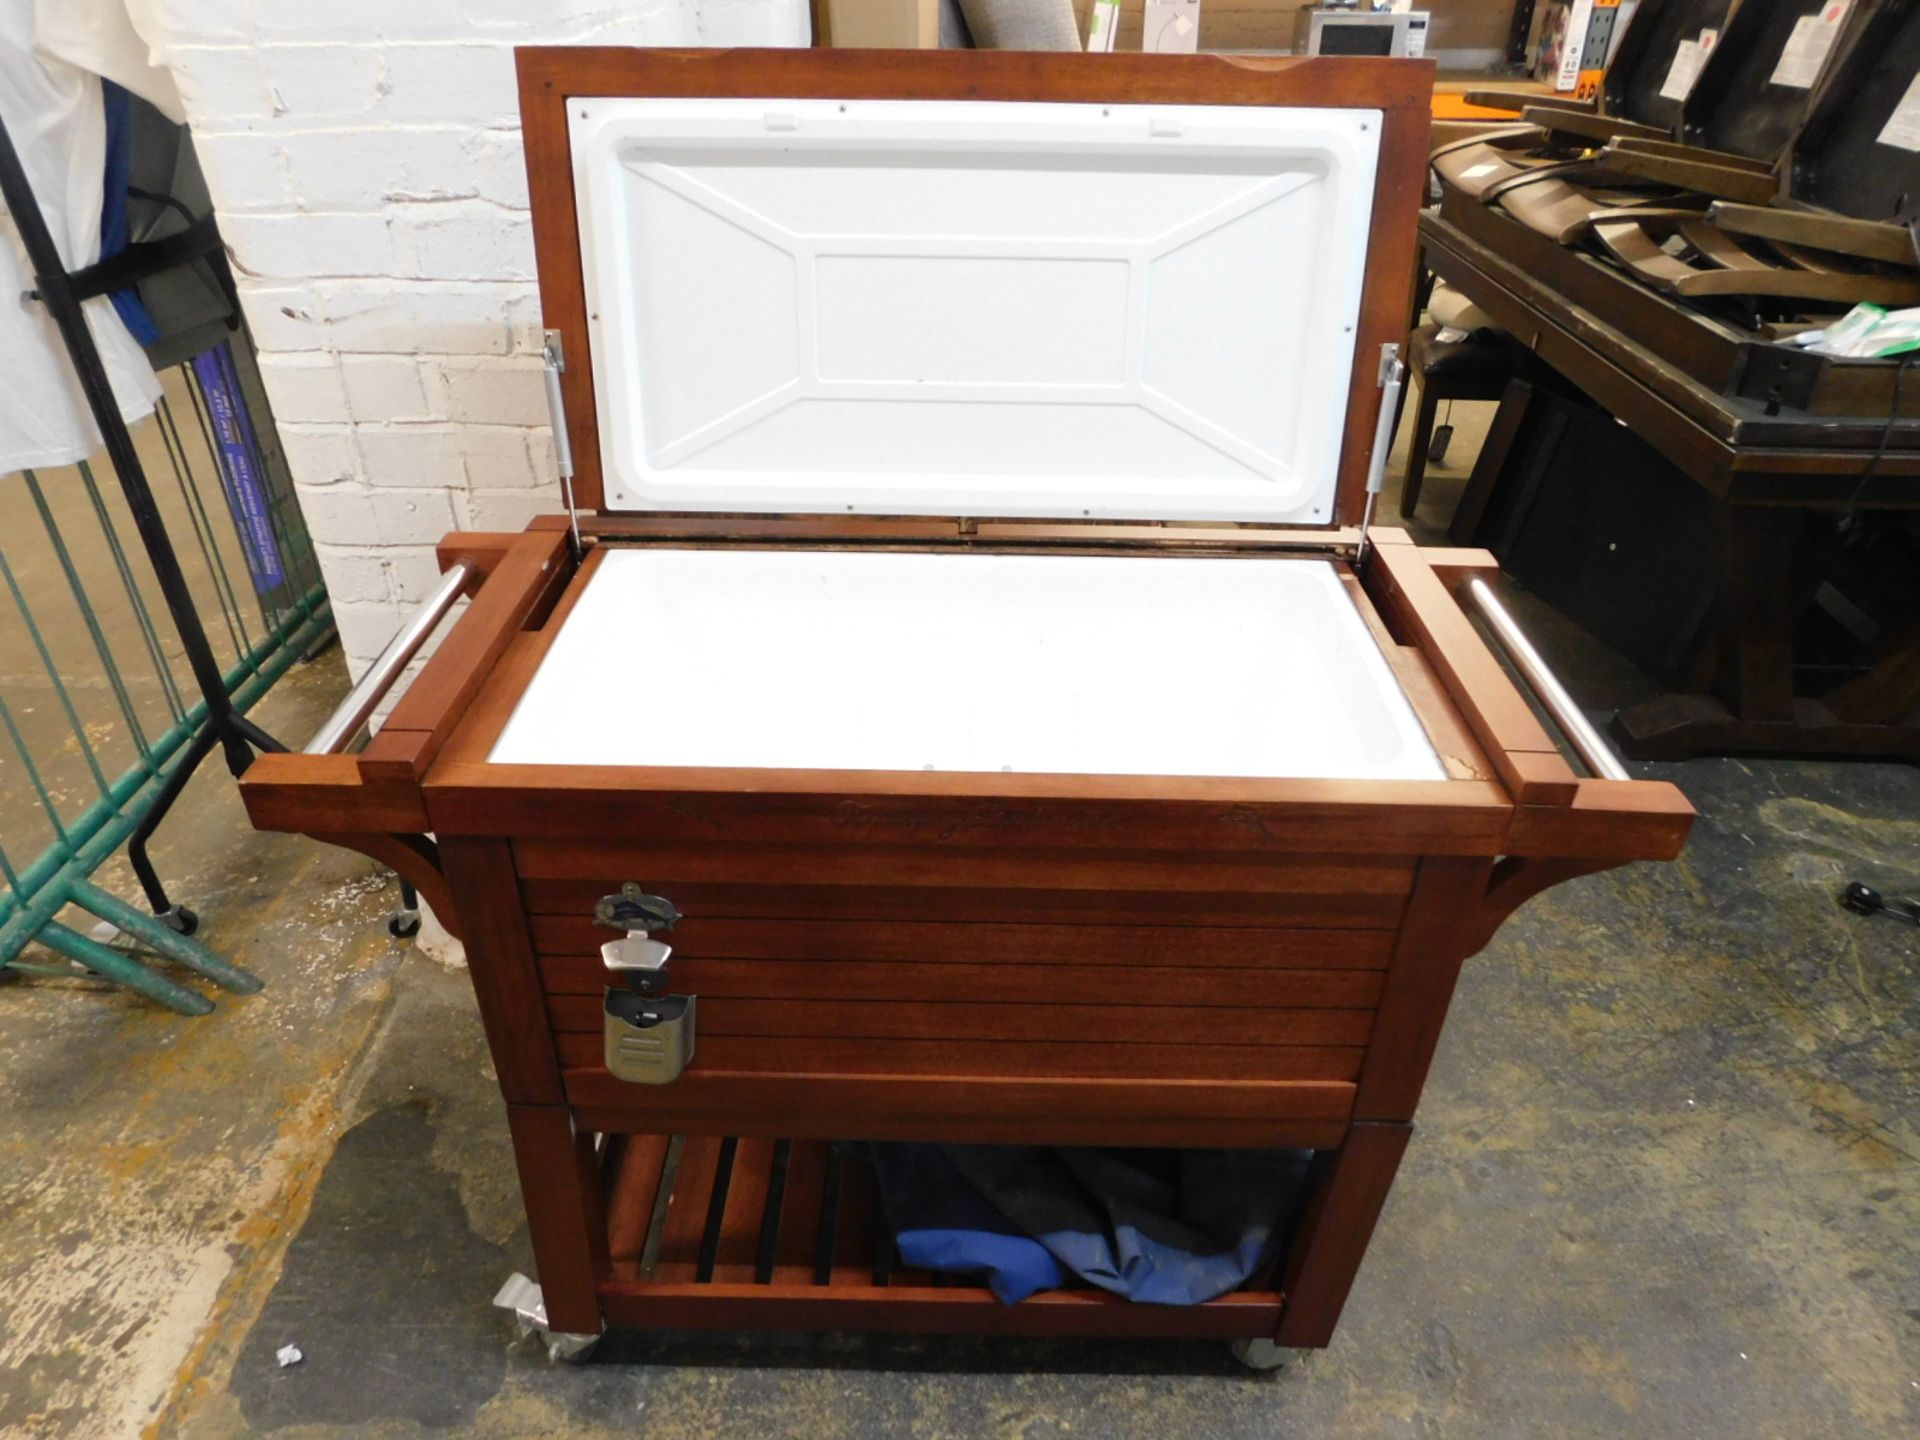 1 TOMMY BAHAMA MAHOGANY 94L ROLLING PARTY COOLER RRP £399